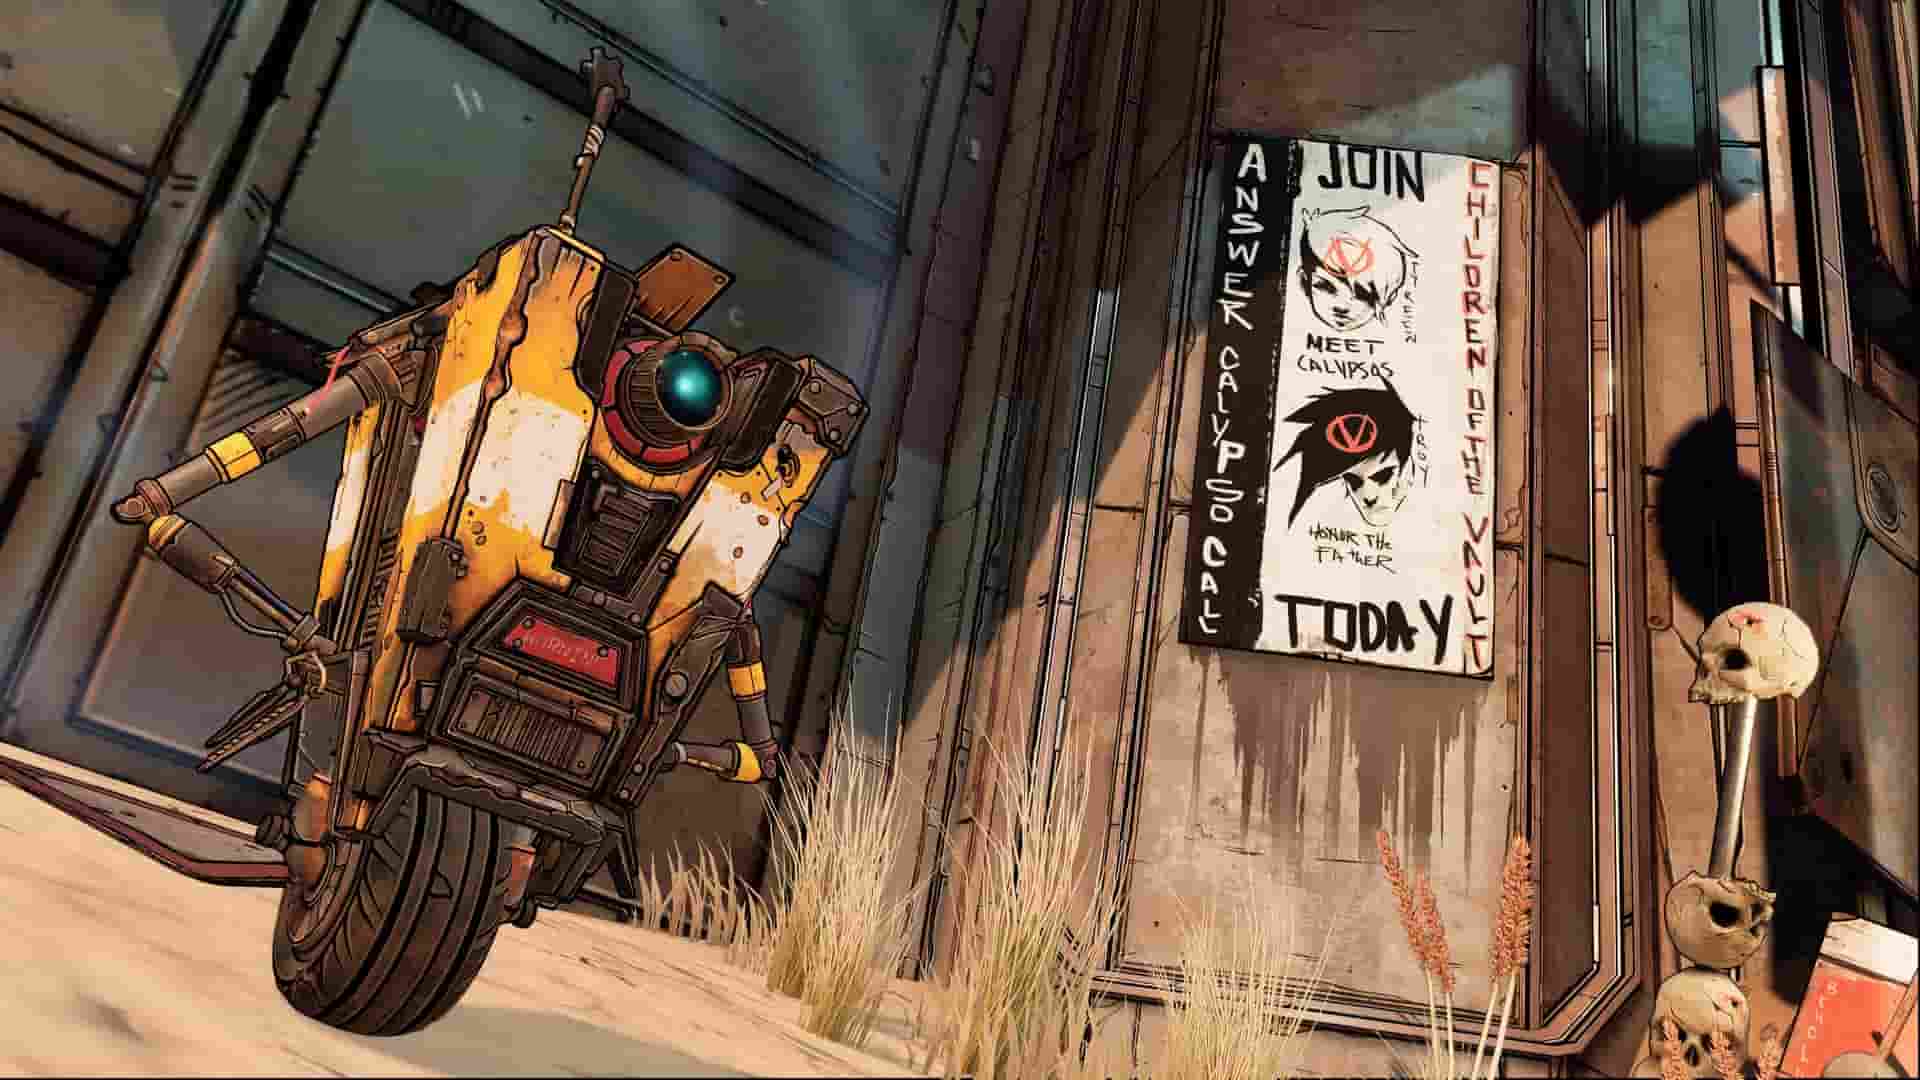 borderlands-3-not-launching-on-xbox-one-xbox-series-x-fixes-workarounds-min